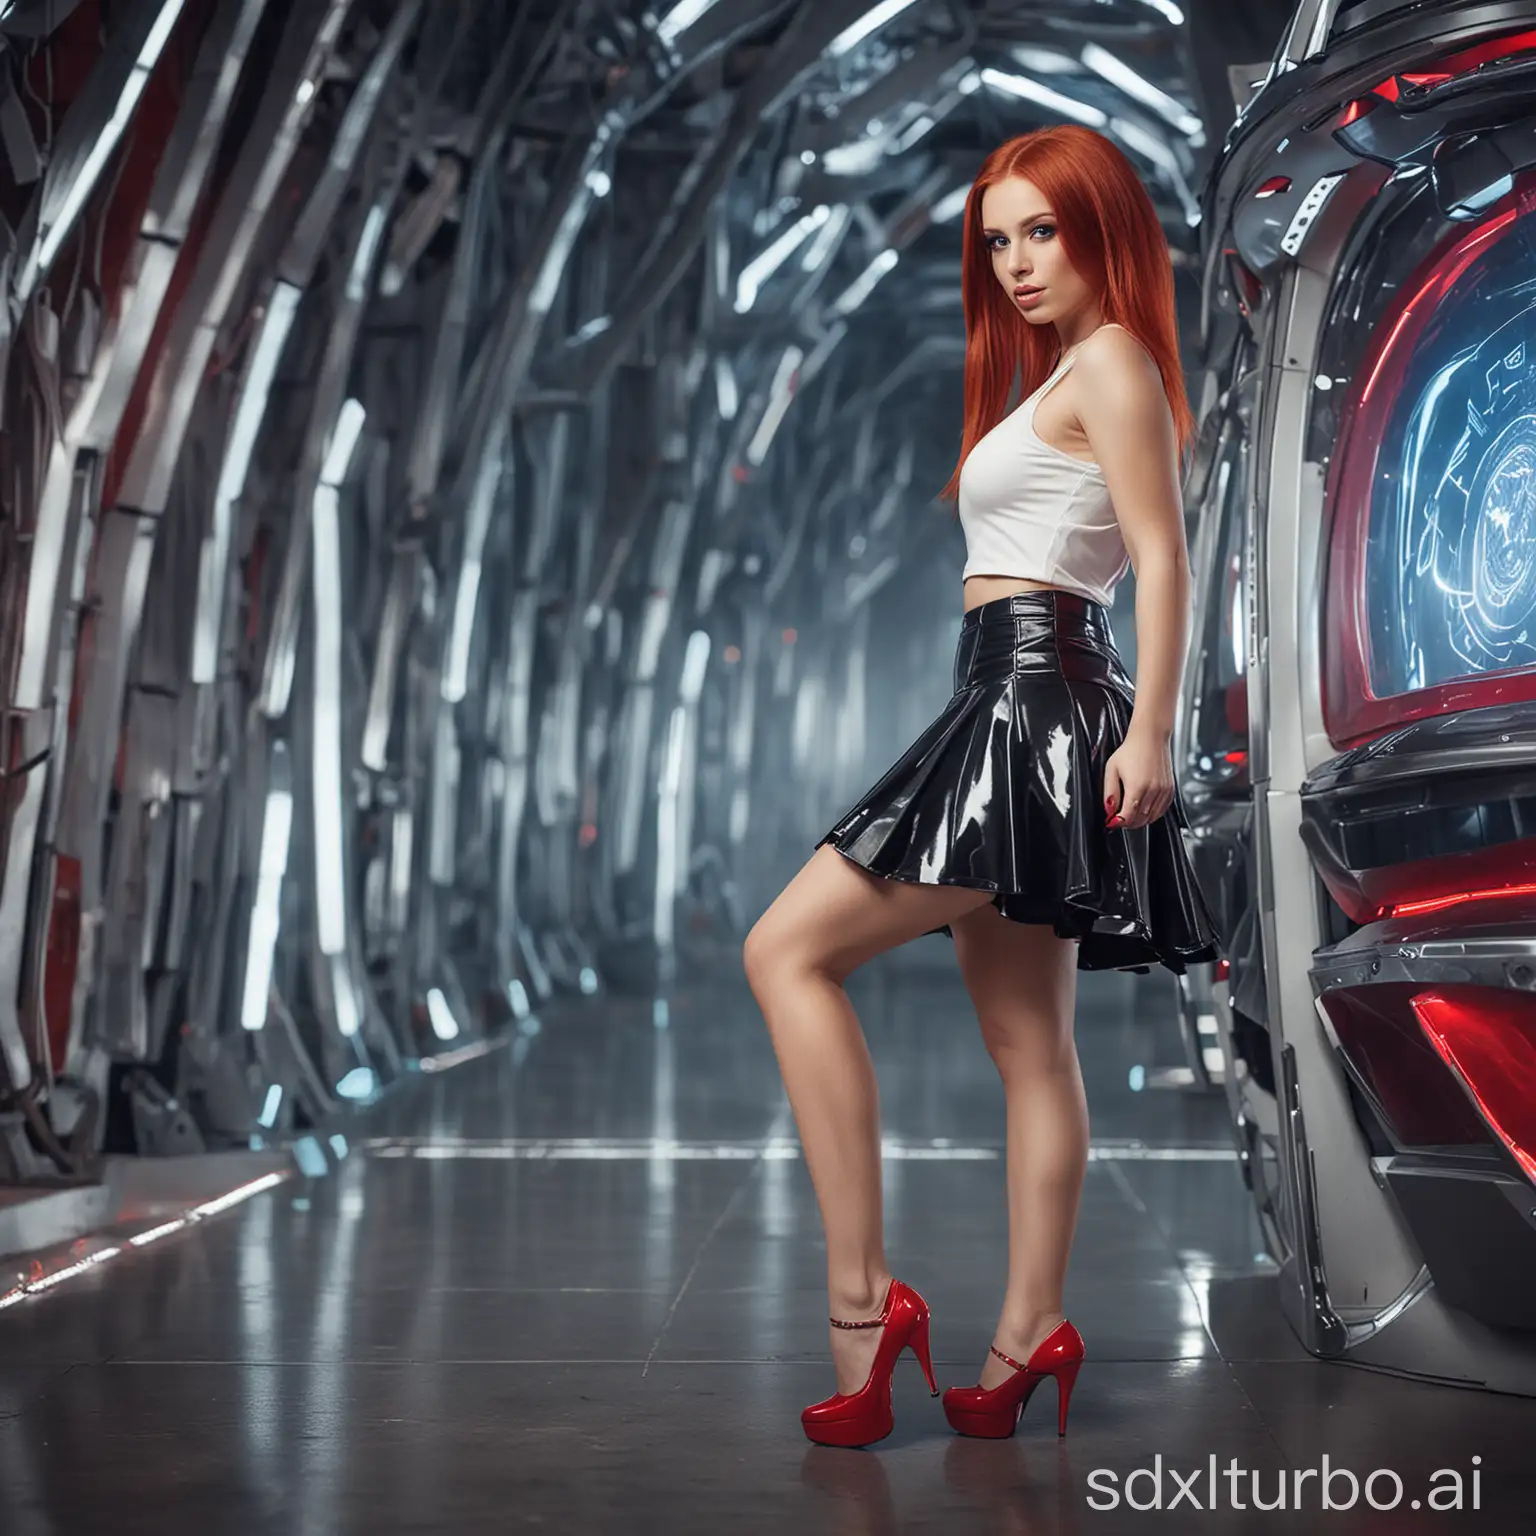 Futuristic-RedHaired-Woman-in-Mini-Skirt-and-High-Heels